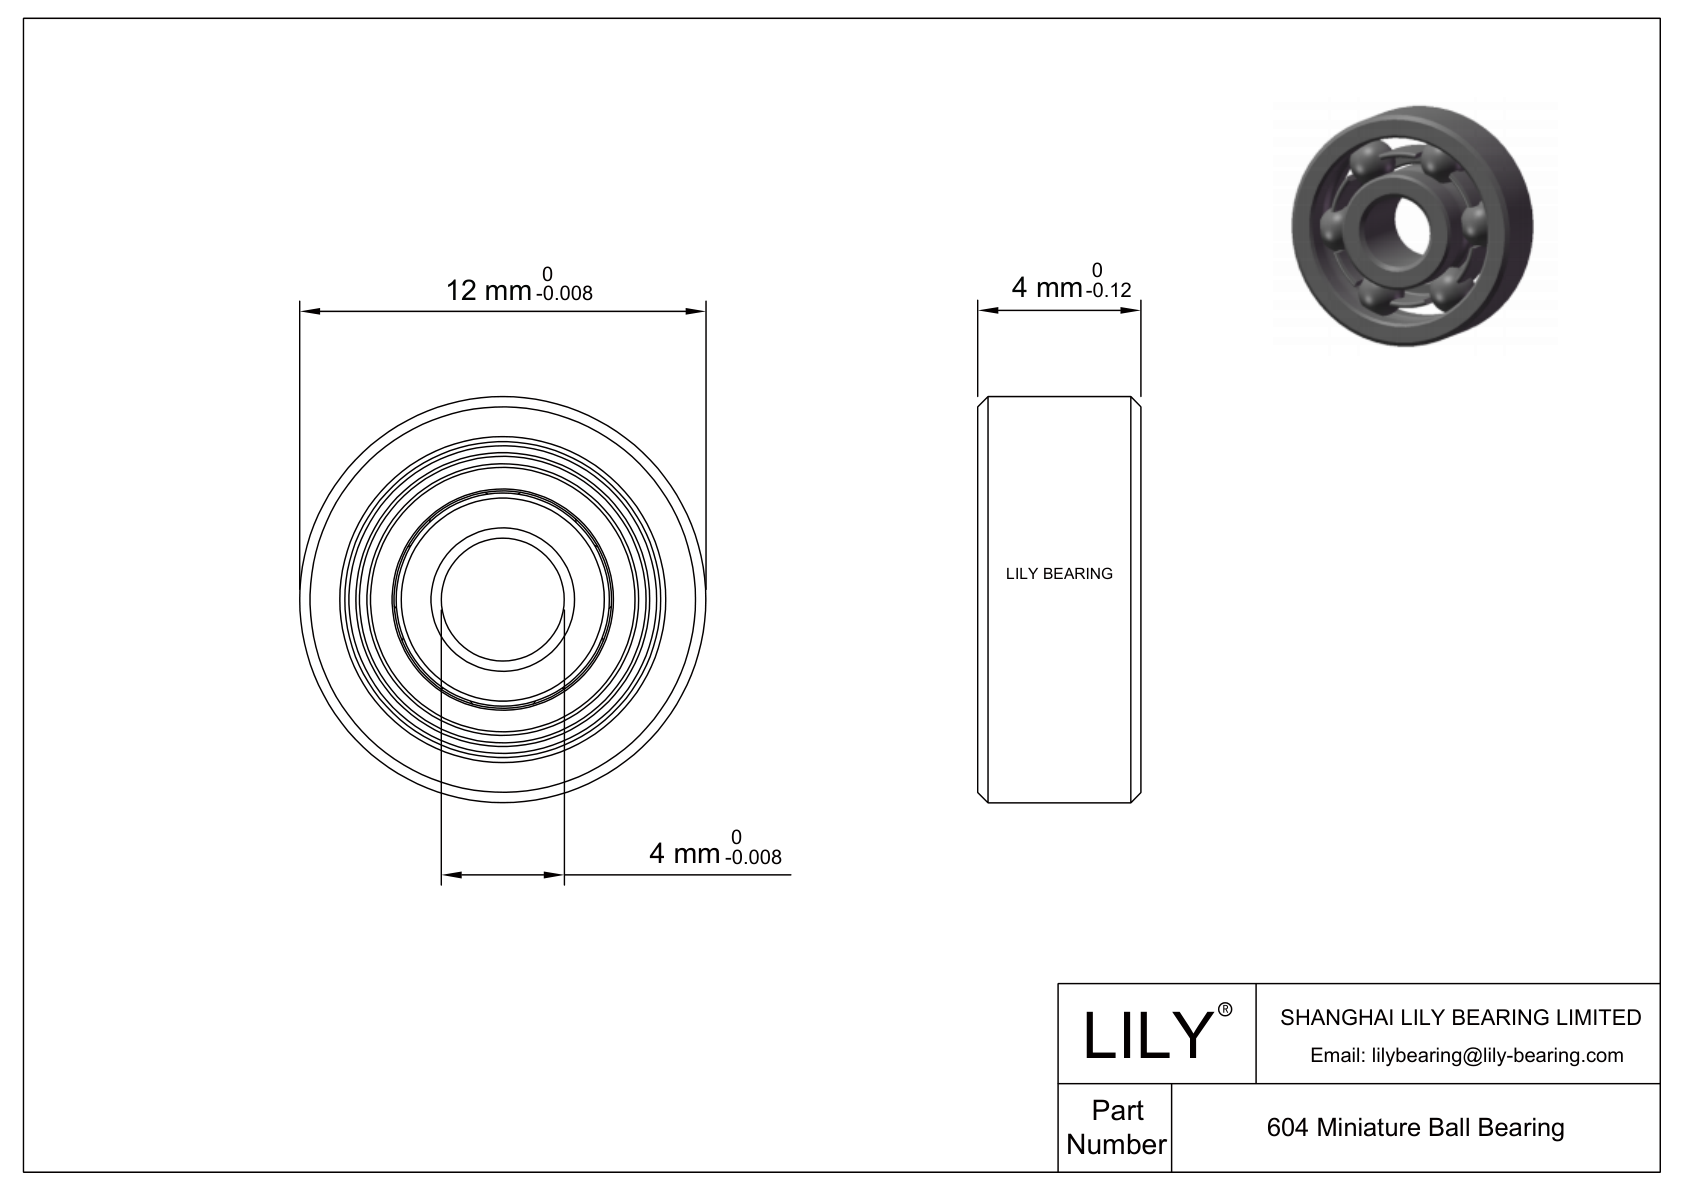 LILY-PU60416-5C1L6M4 Polyurethane Coated Bearing With Screw cad drawing